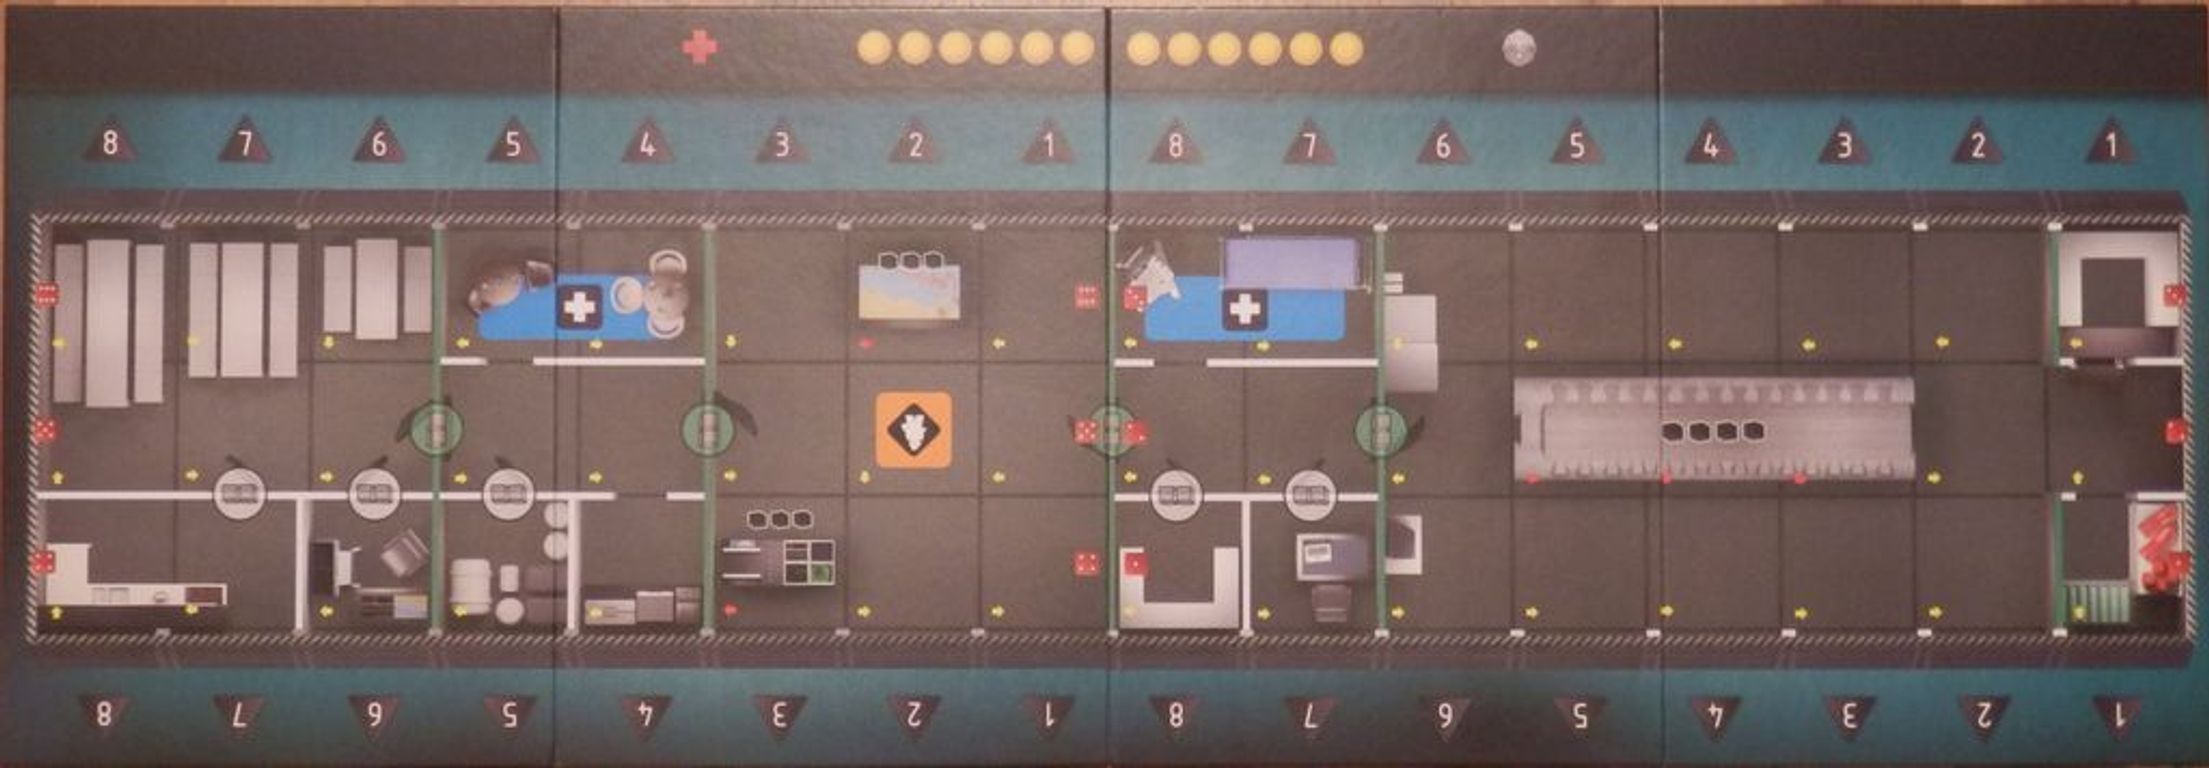 Flash Point: Fire Rescue - Dangerous Waters game board